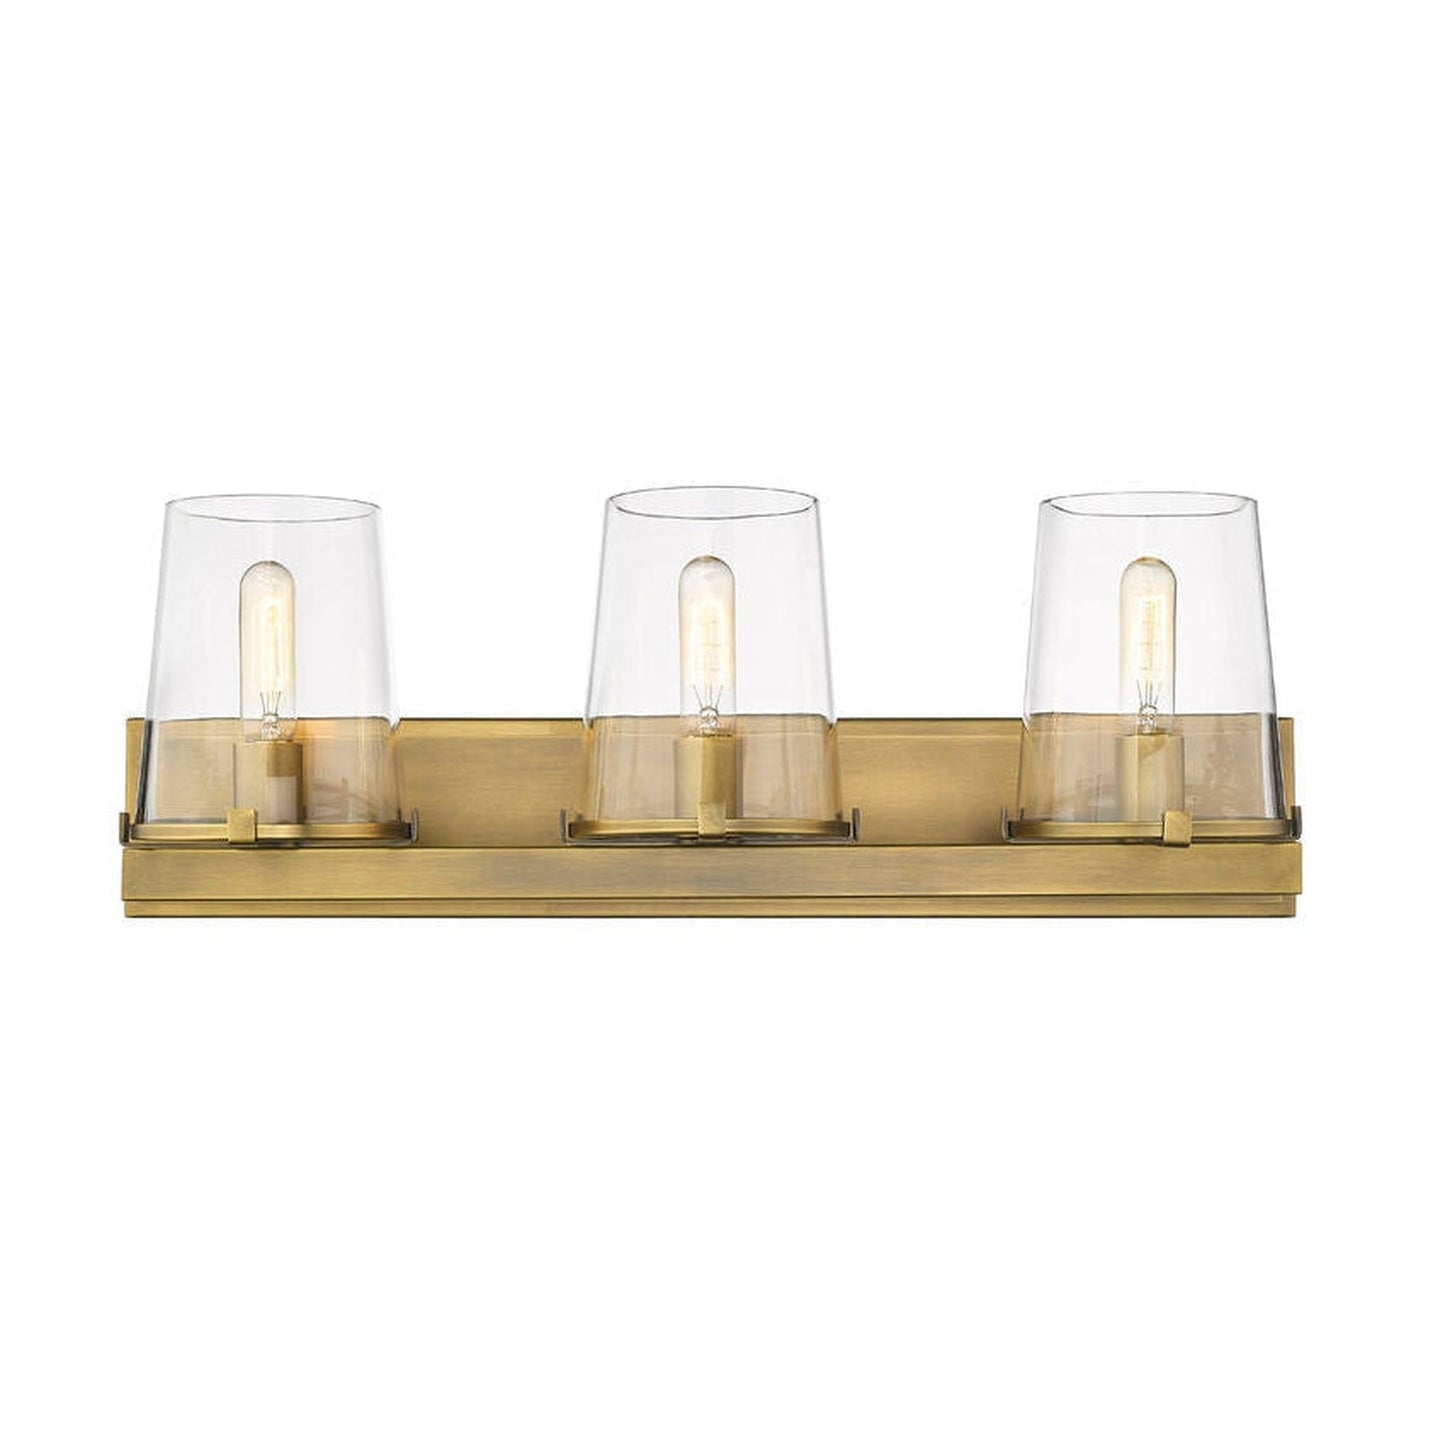 Z-Lite Callista 28" 3-Light Rubbed Brass Vanity Light With Clear Glass Shade